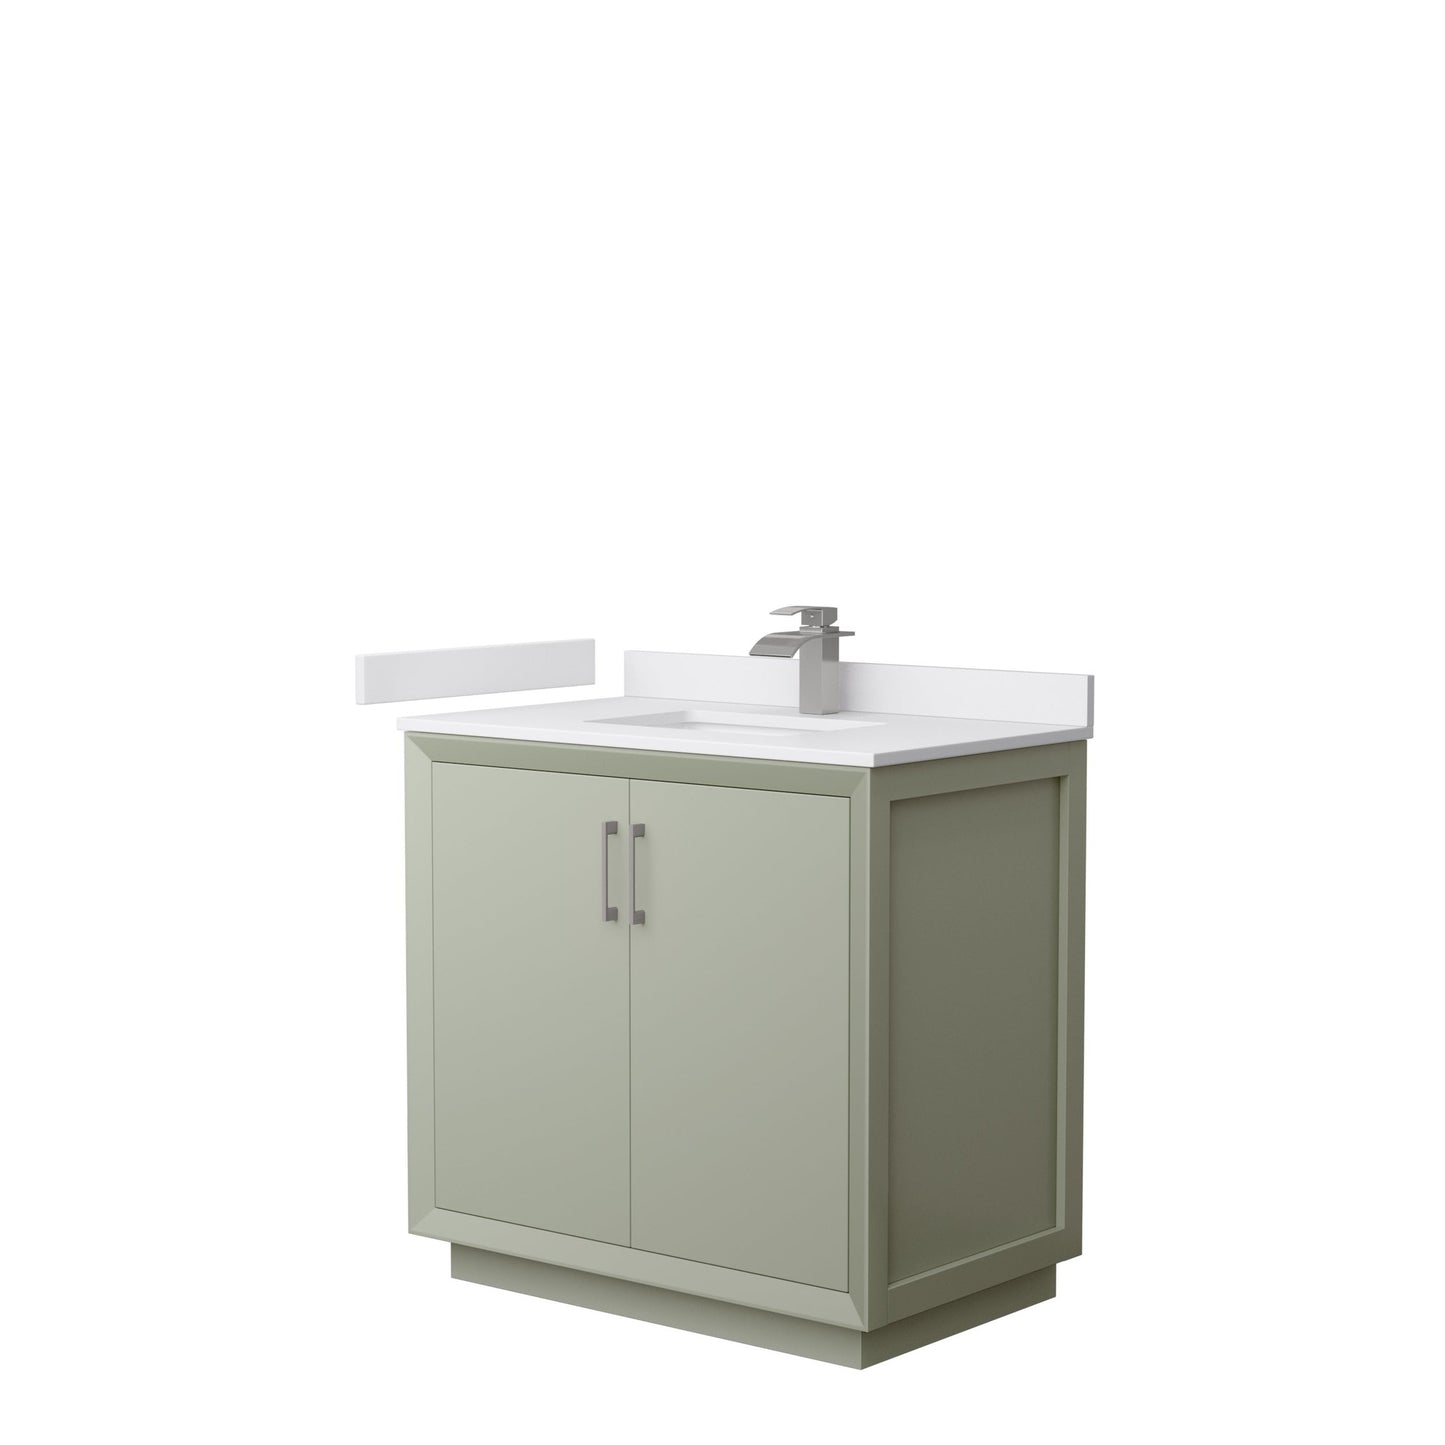 Wyndham Collection Strada 36" Single Bathroom Vanity in Light Green, White Cultured Marble Countertop, Undermount Square Sink, Brushed Nickel Trim